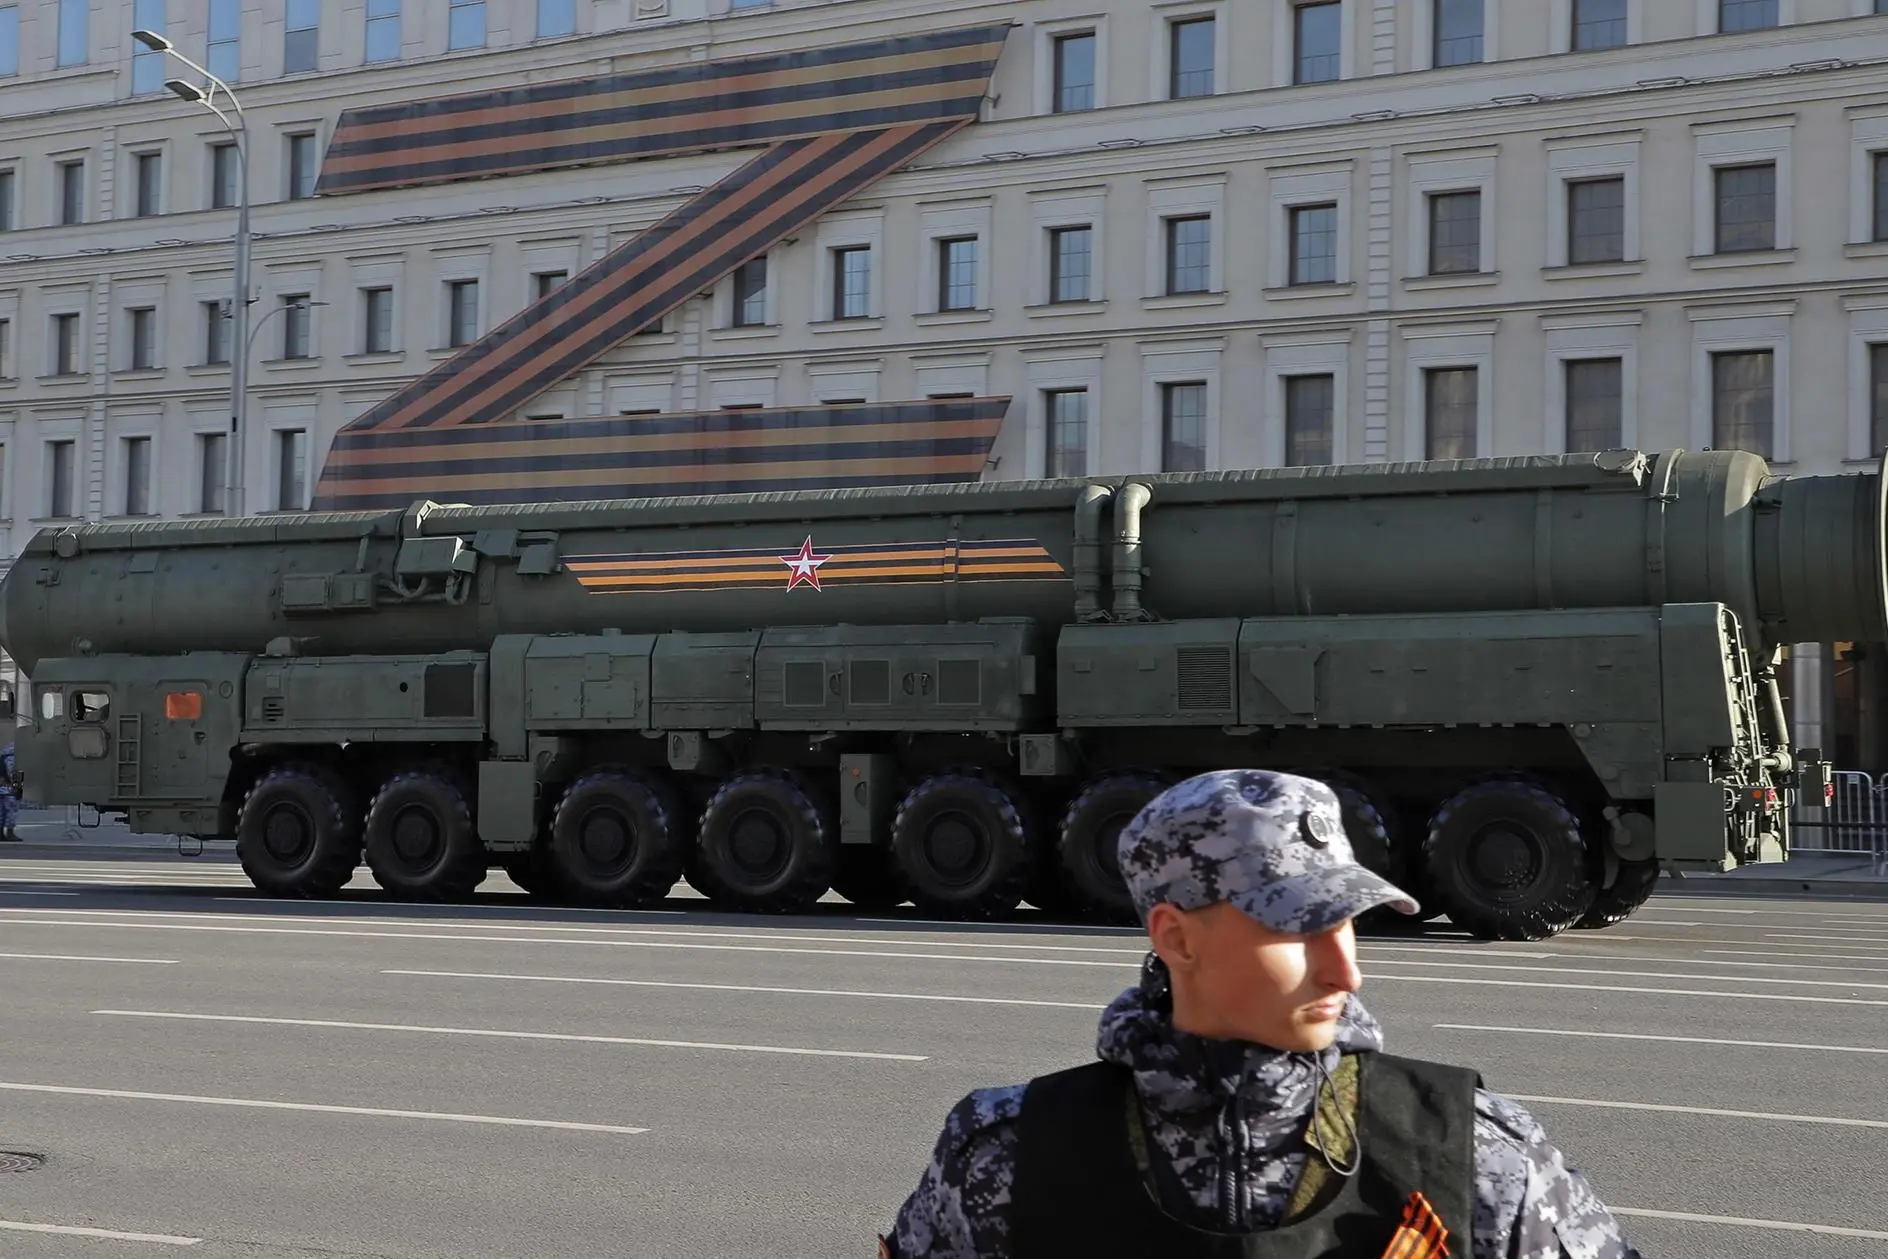 epa10616519 A Russian Yars intercontinental ballistic missile launcher drives in the downtown area of Moscow, Russia, 09 May 2023, before the military parade which will take place on the Red Square to commemorate the victory of the Soviet Union's Red Army over Nazi-Germany in WWII. EPA/MAXIM SHIPENKOV